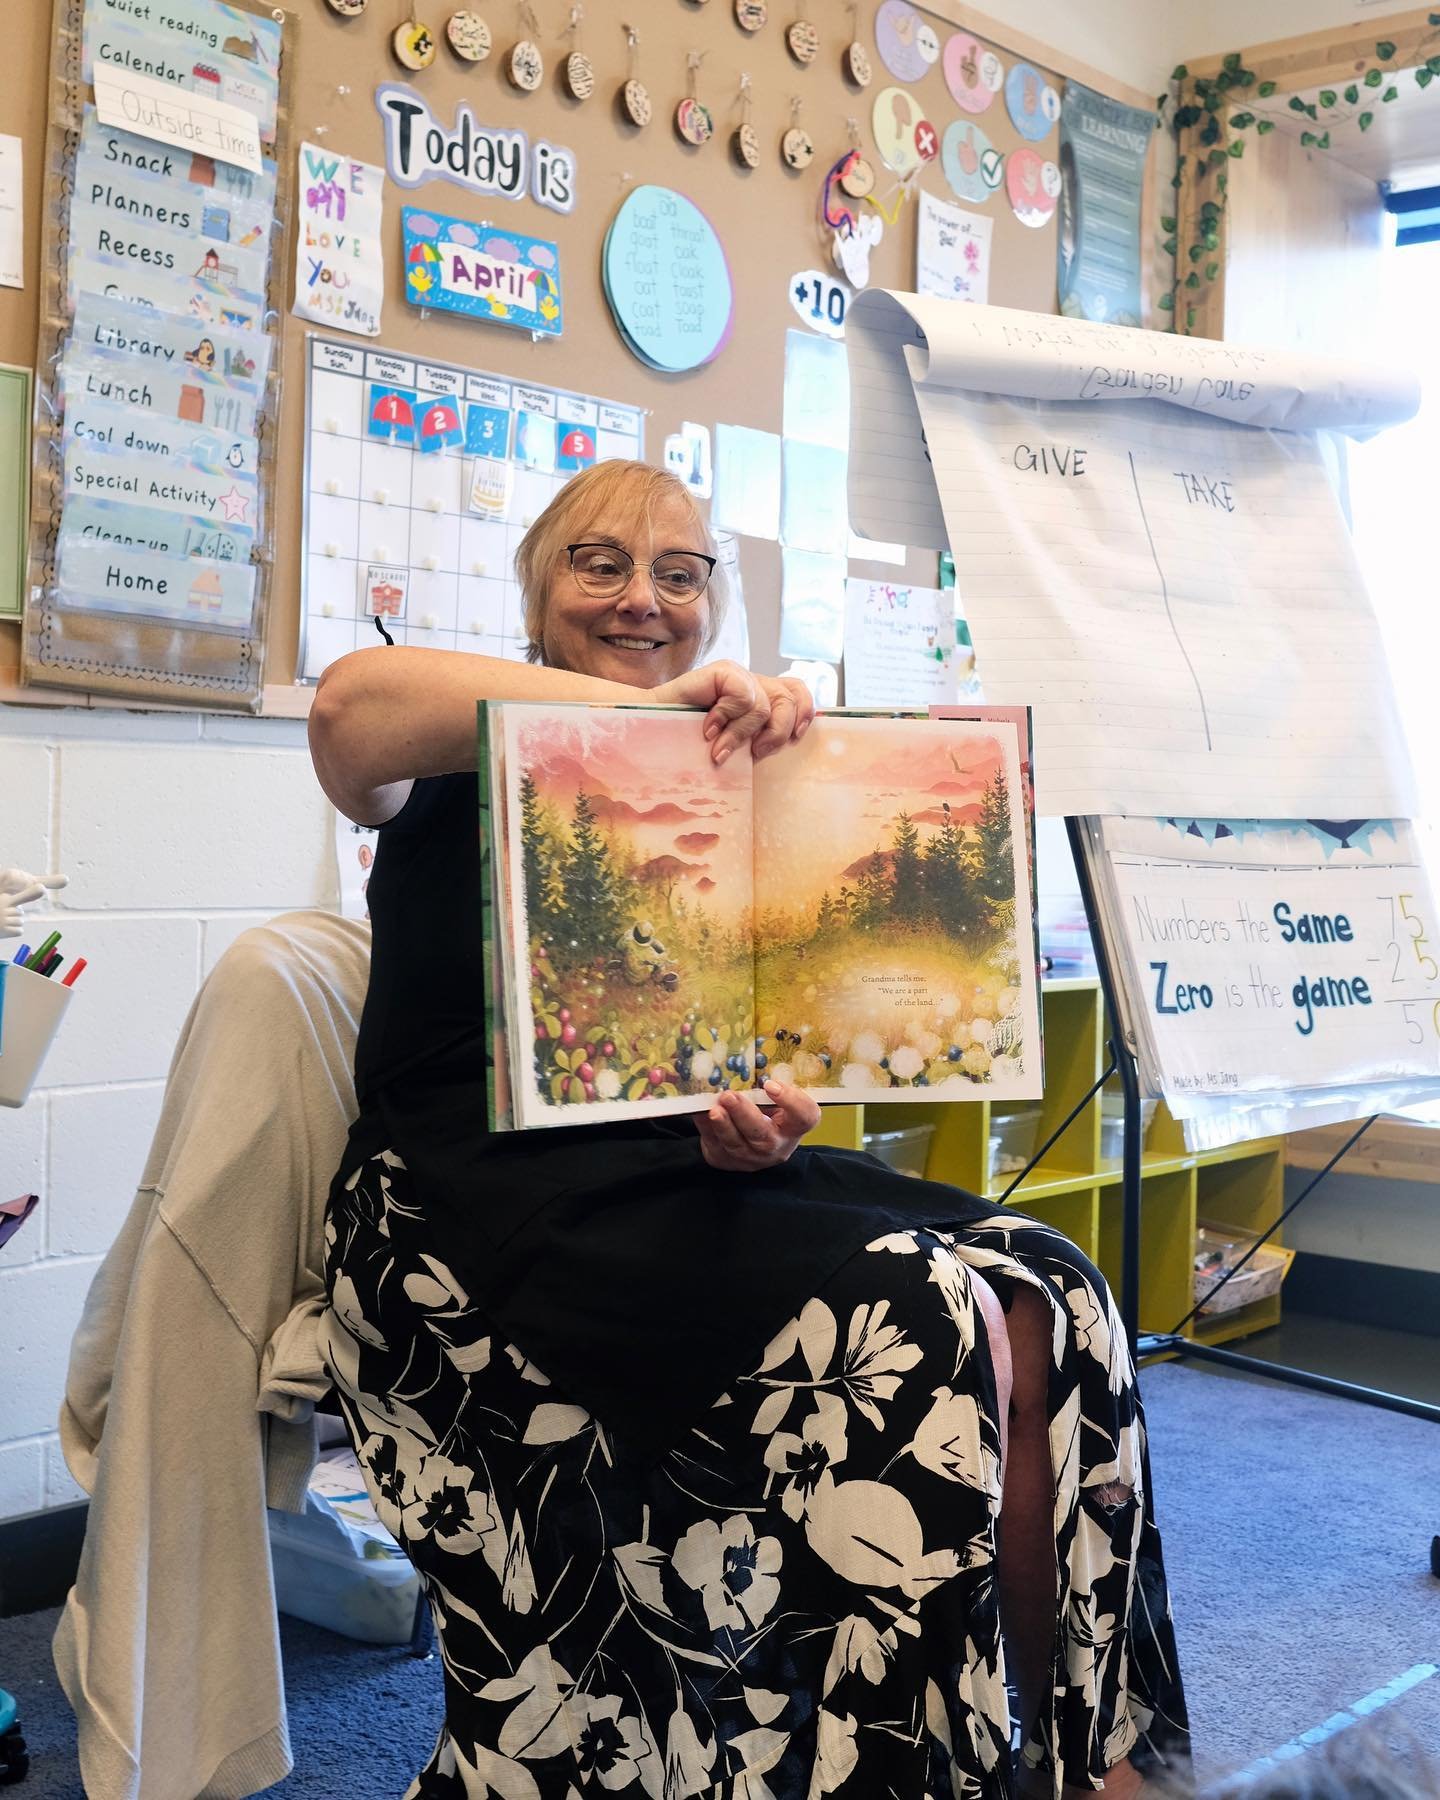 We ended our first week in classrooms with a story from Michaela Goade🫐🍃

Michaela&rsquo;s children&rsquo;s book Berry Song tells the tale of a young girl foraging alongside her grandmother. Together, they share how foraging connects them to the la